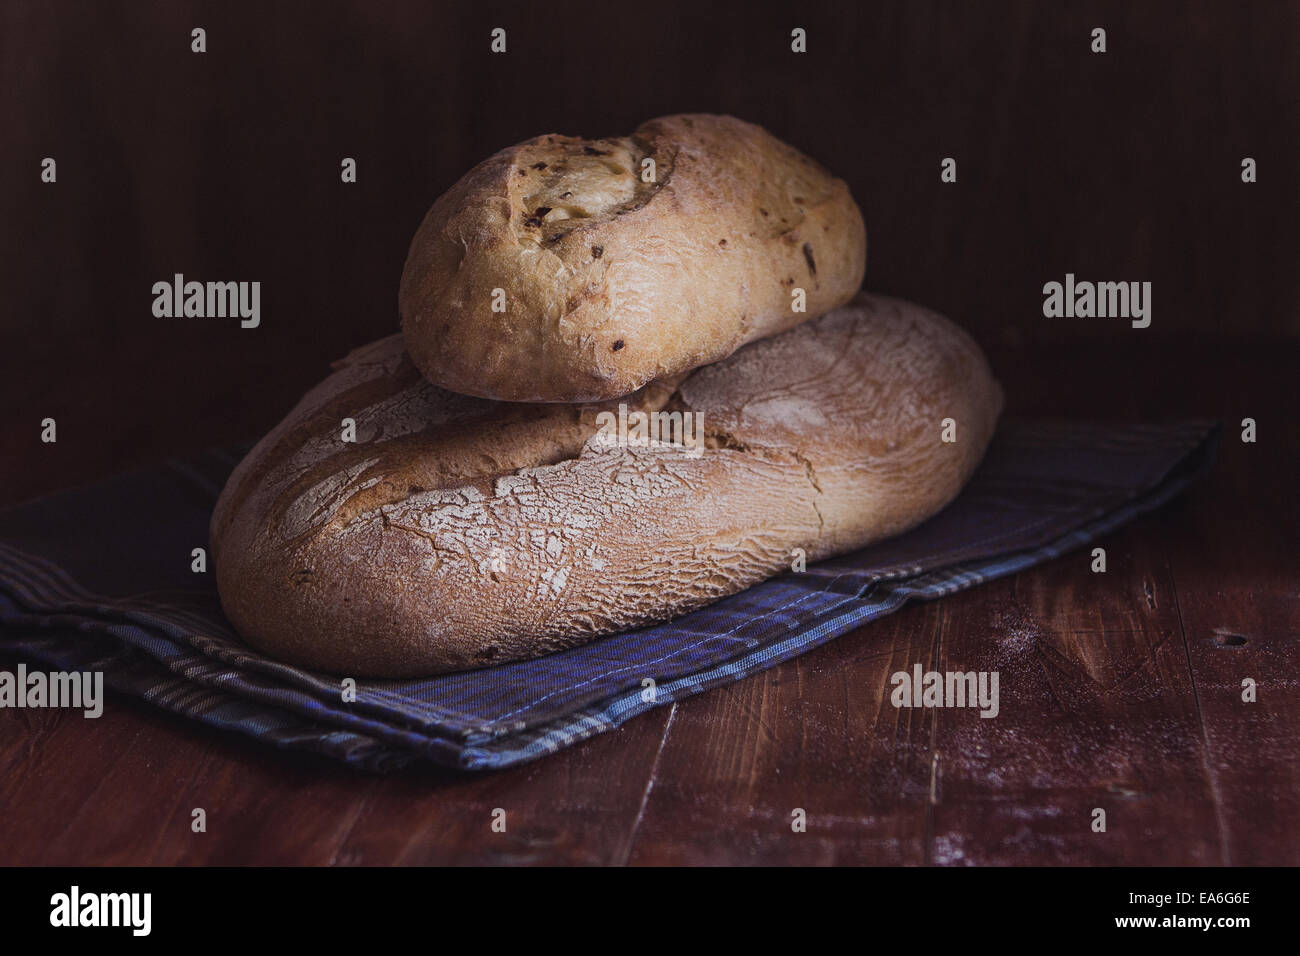 Two Loaves of bread on a table Stock Photo